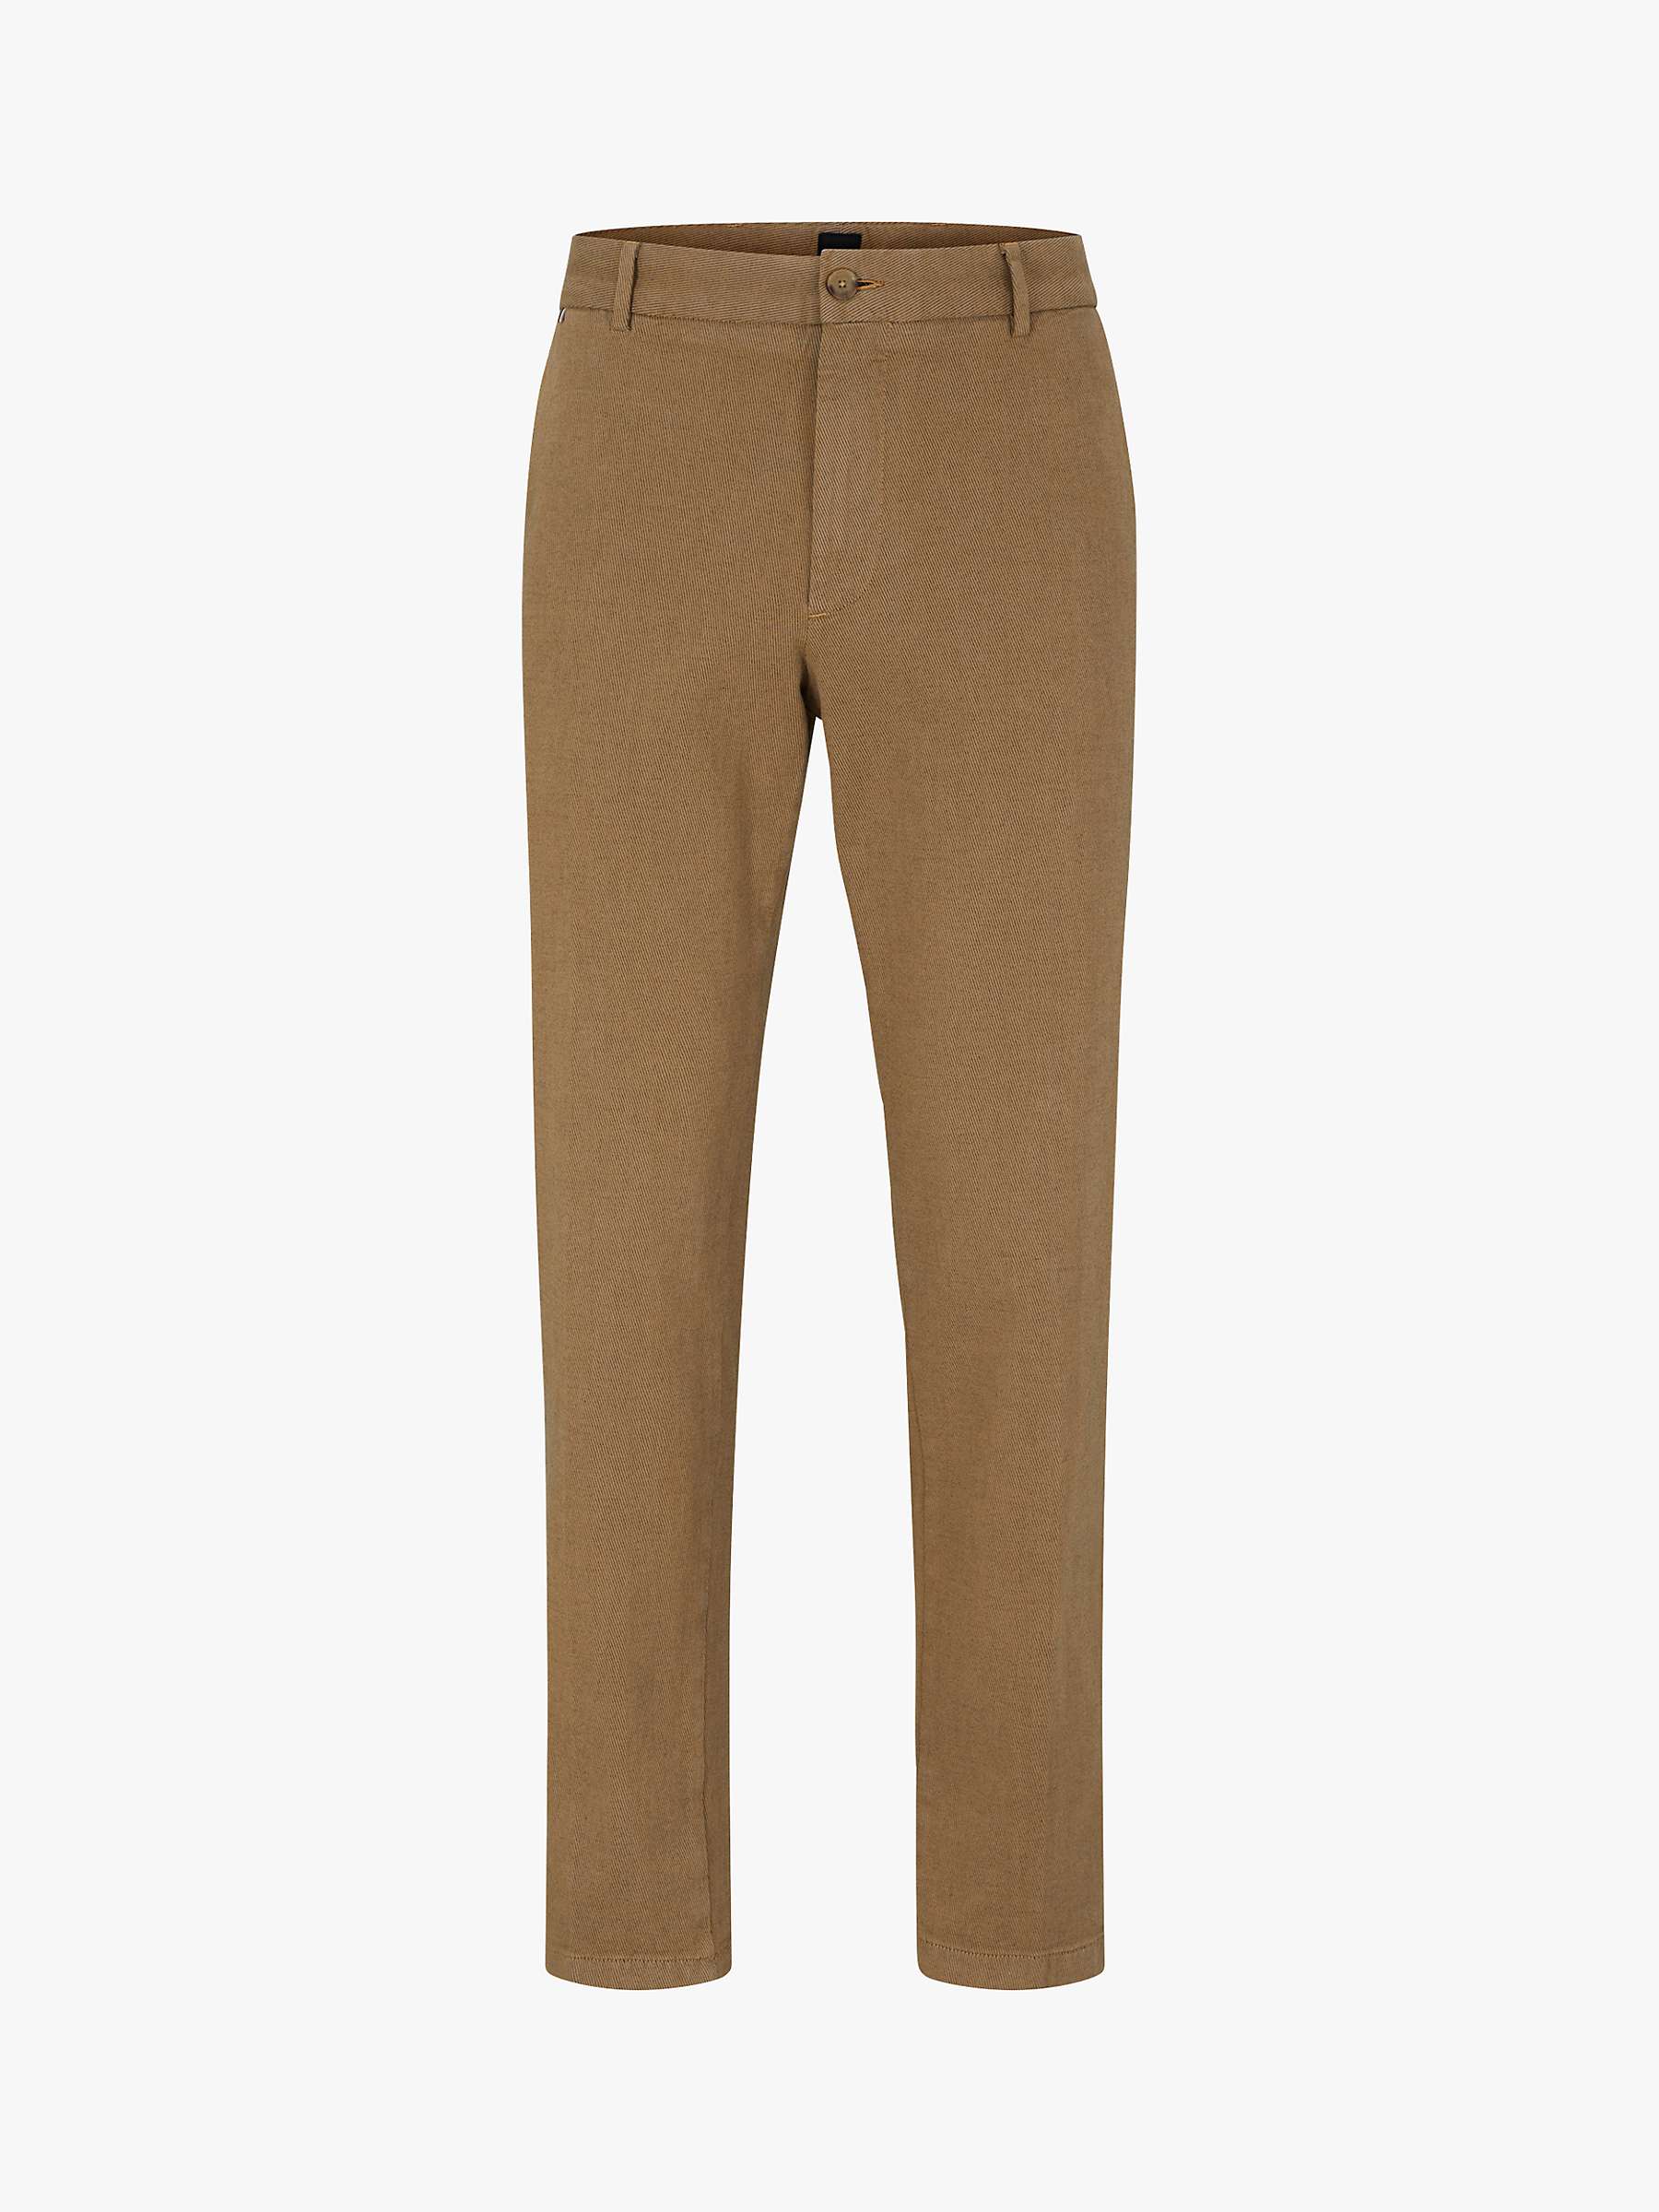 BOSS Two-Tone Stretch-Cotton Twill Regular Fit Chinos, Medium Beige at ...